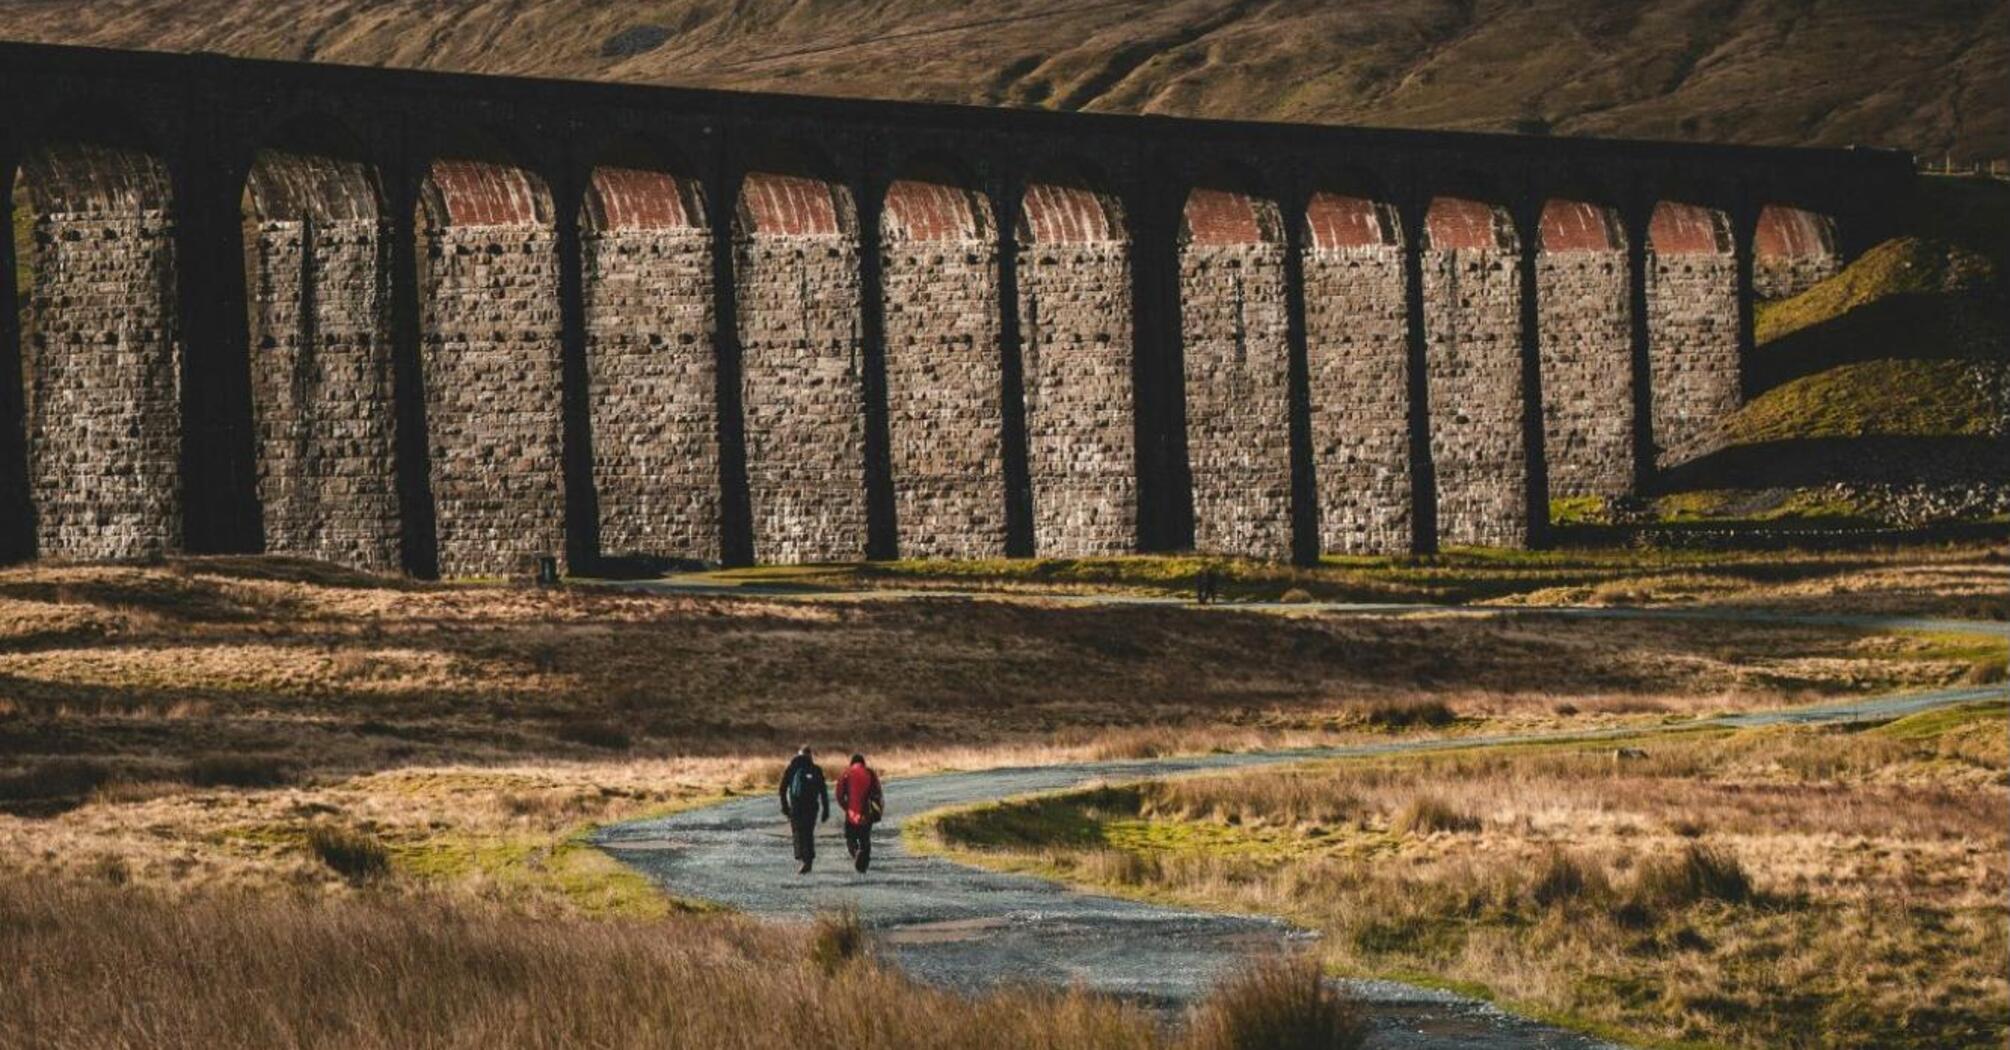 Two cyclists riding on a path beside a historic stone viaduct in the Yorkshire Dales